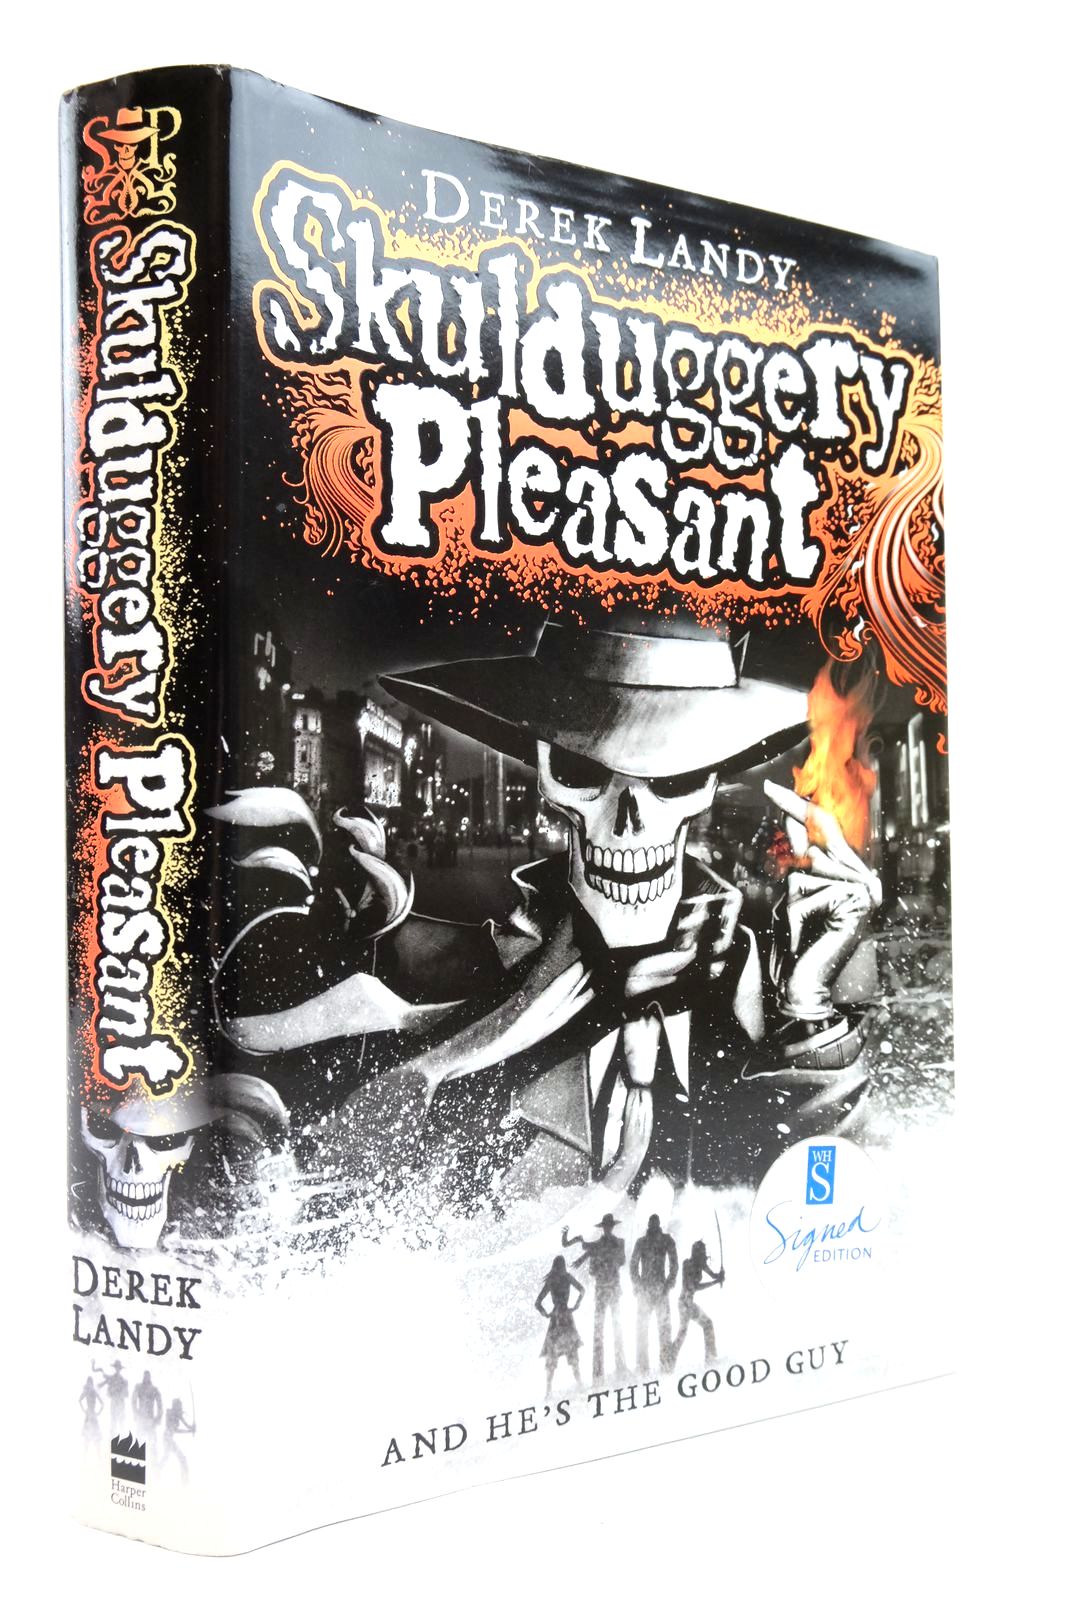 Photo of SKULDUGGERY PLEASANT written by Landy, Derek published by Harper Collins (STOCK CODE: 2140372)  for sale by Stella & Rose's Books